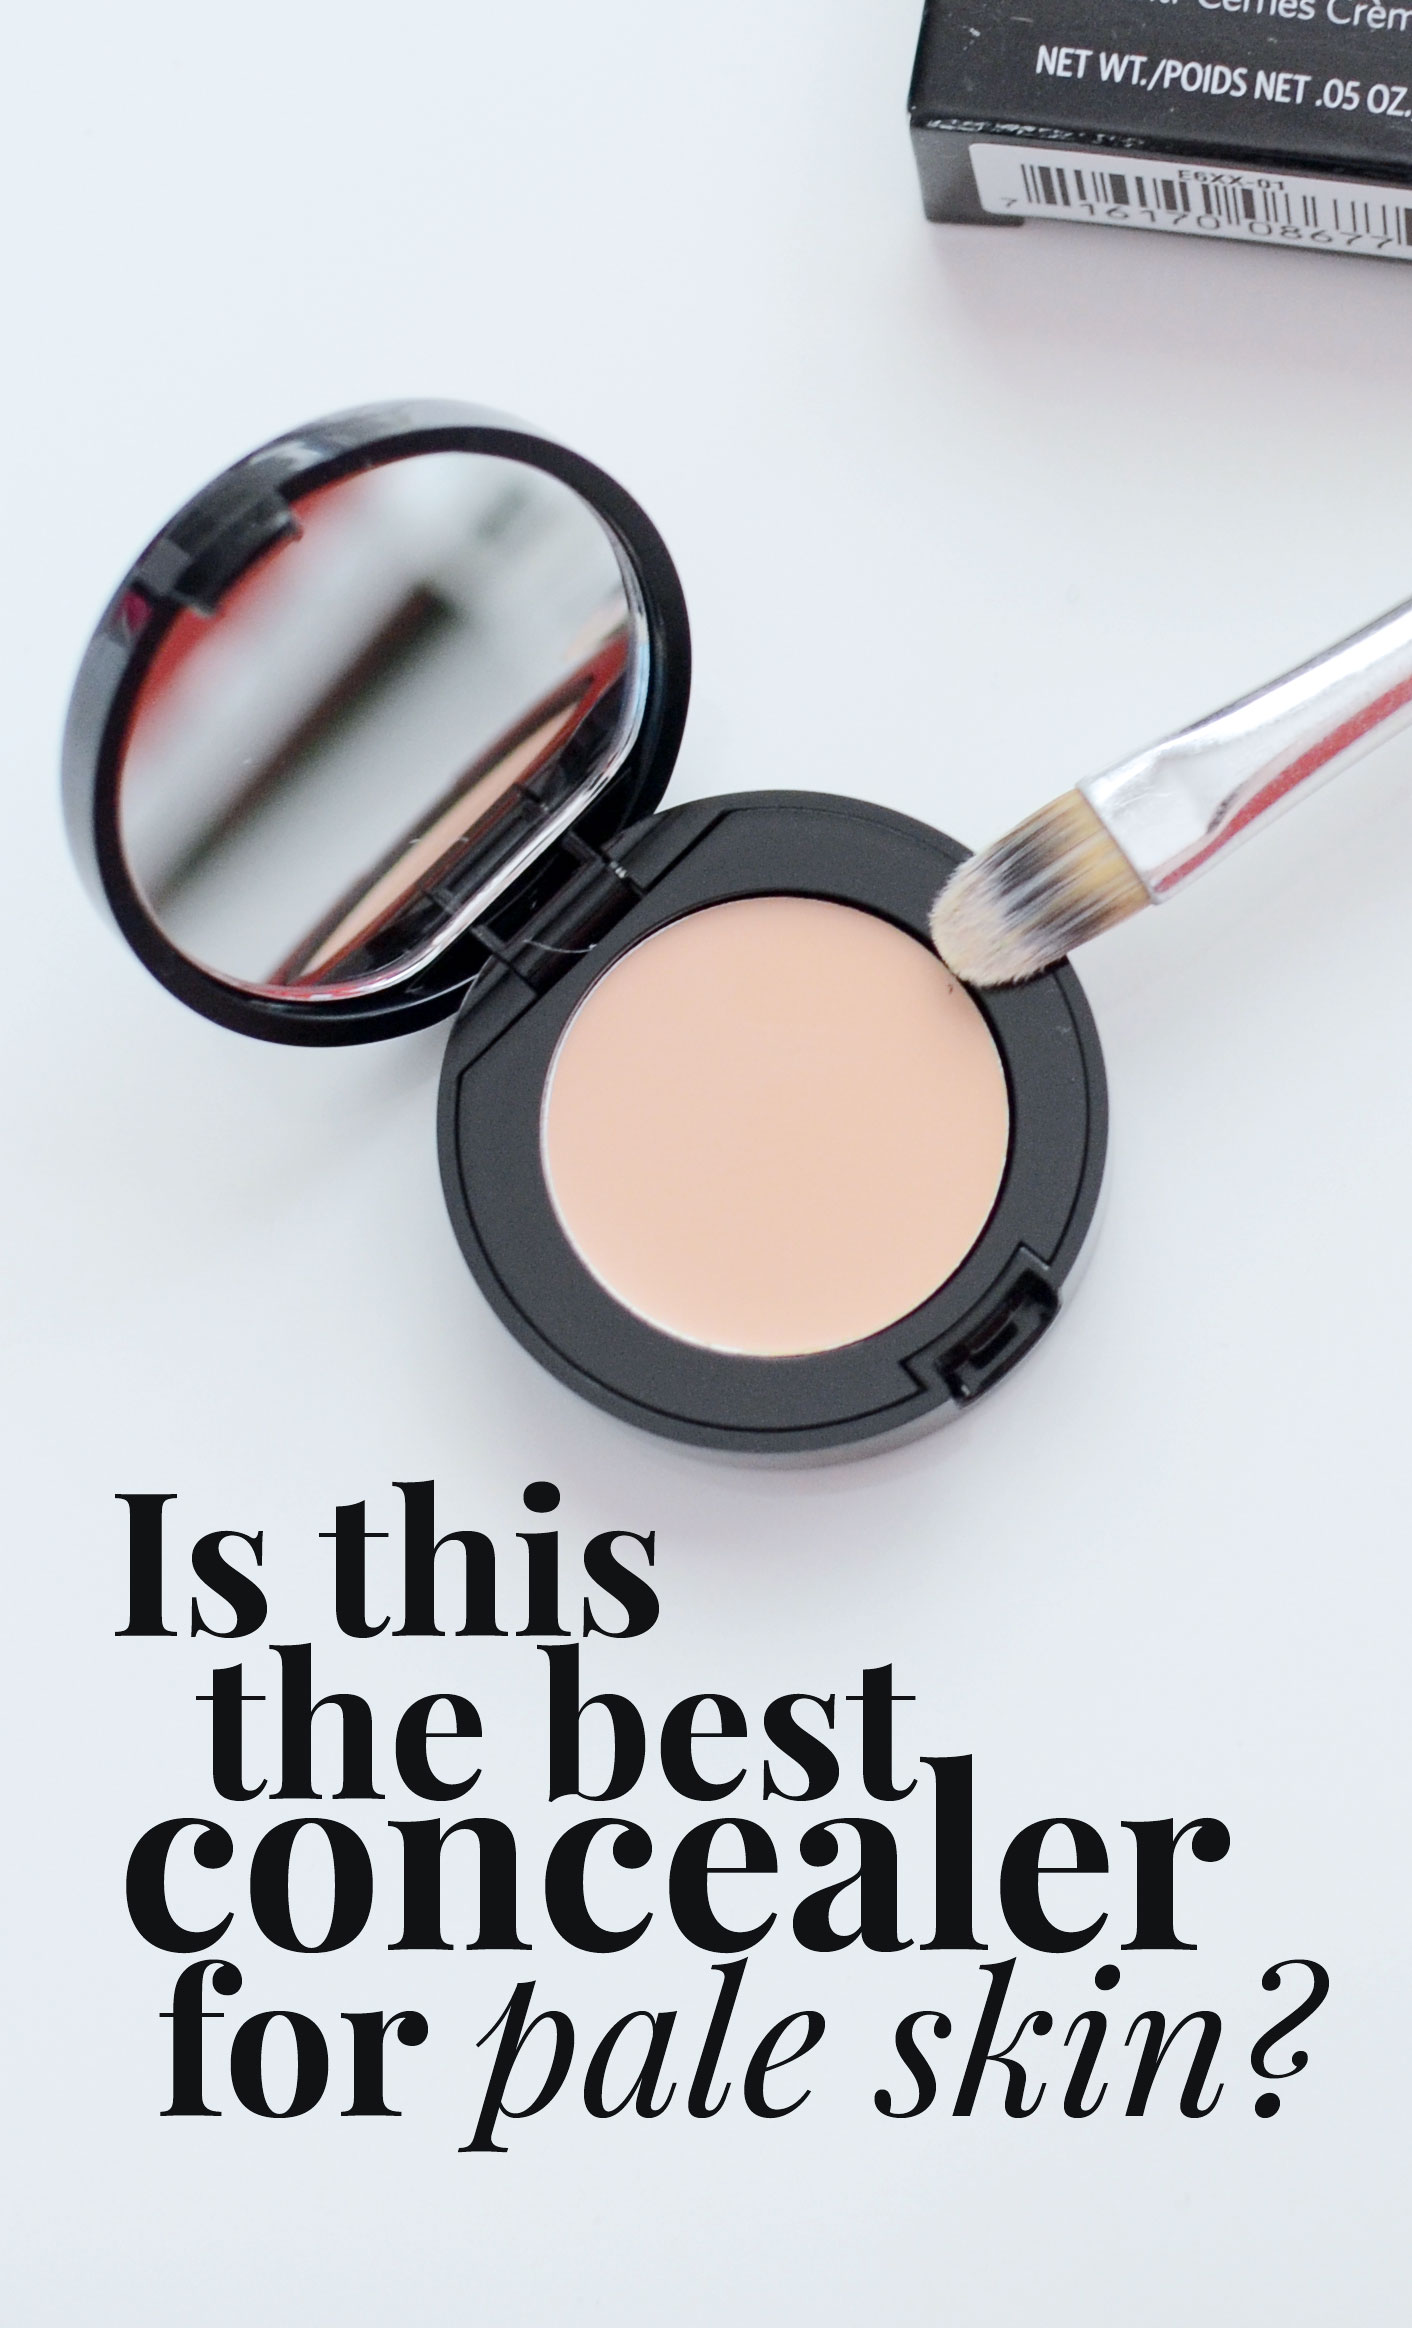 Is this the best concealer for pale skin?